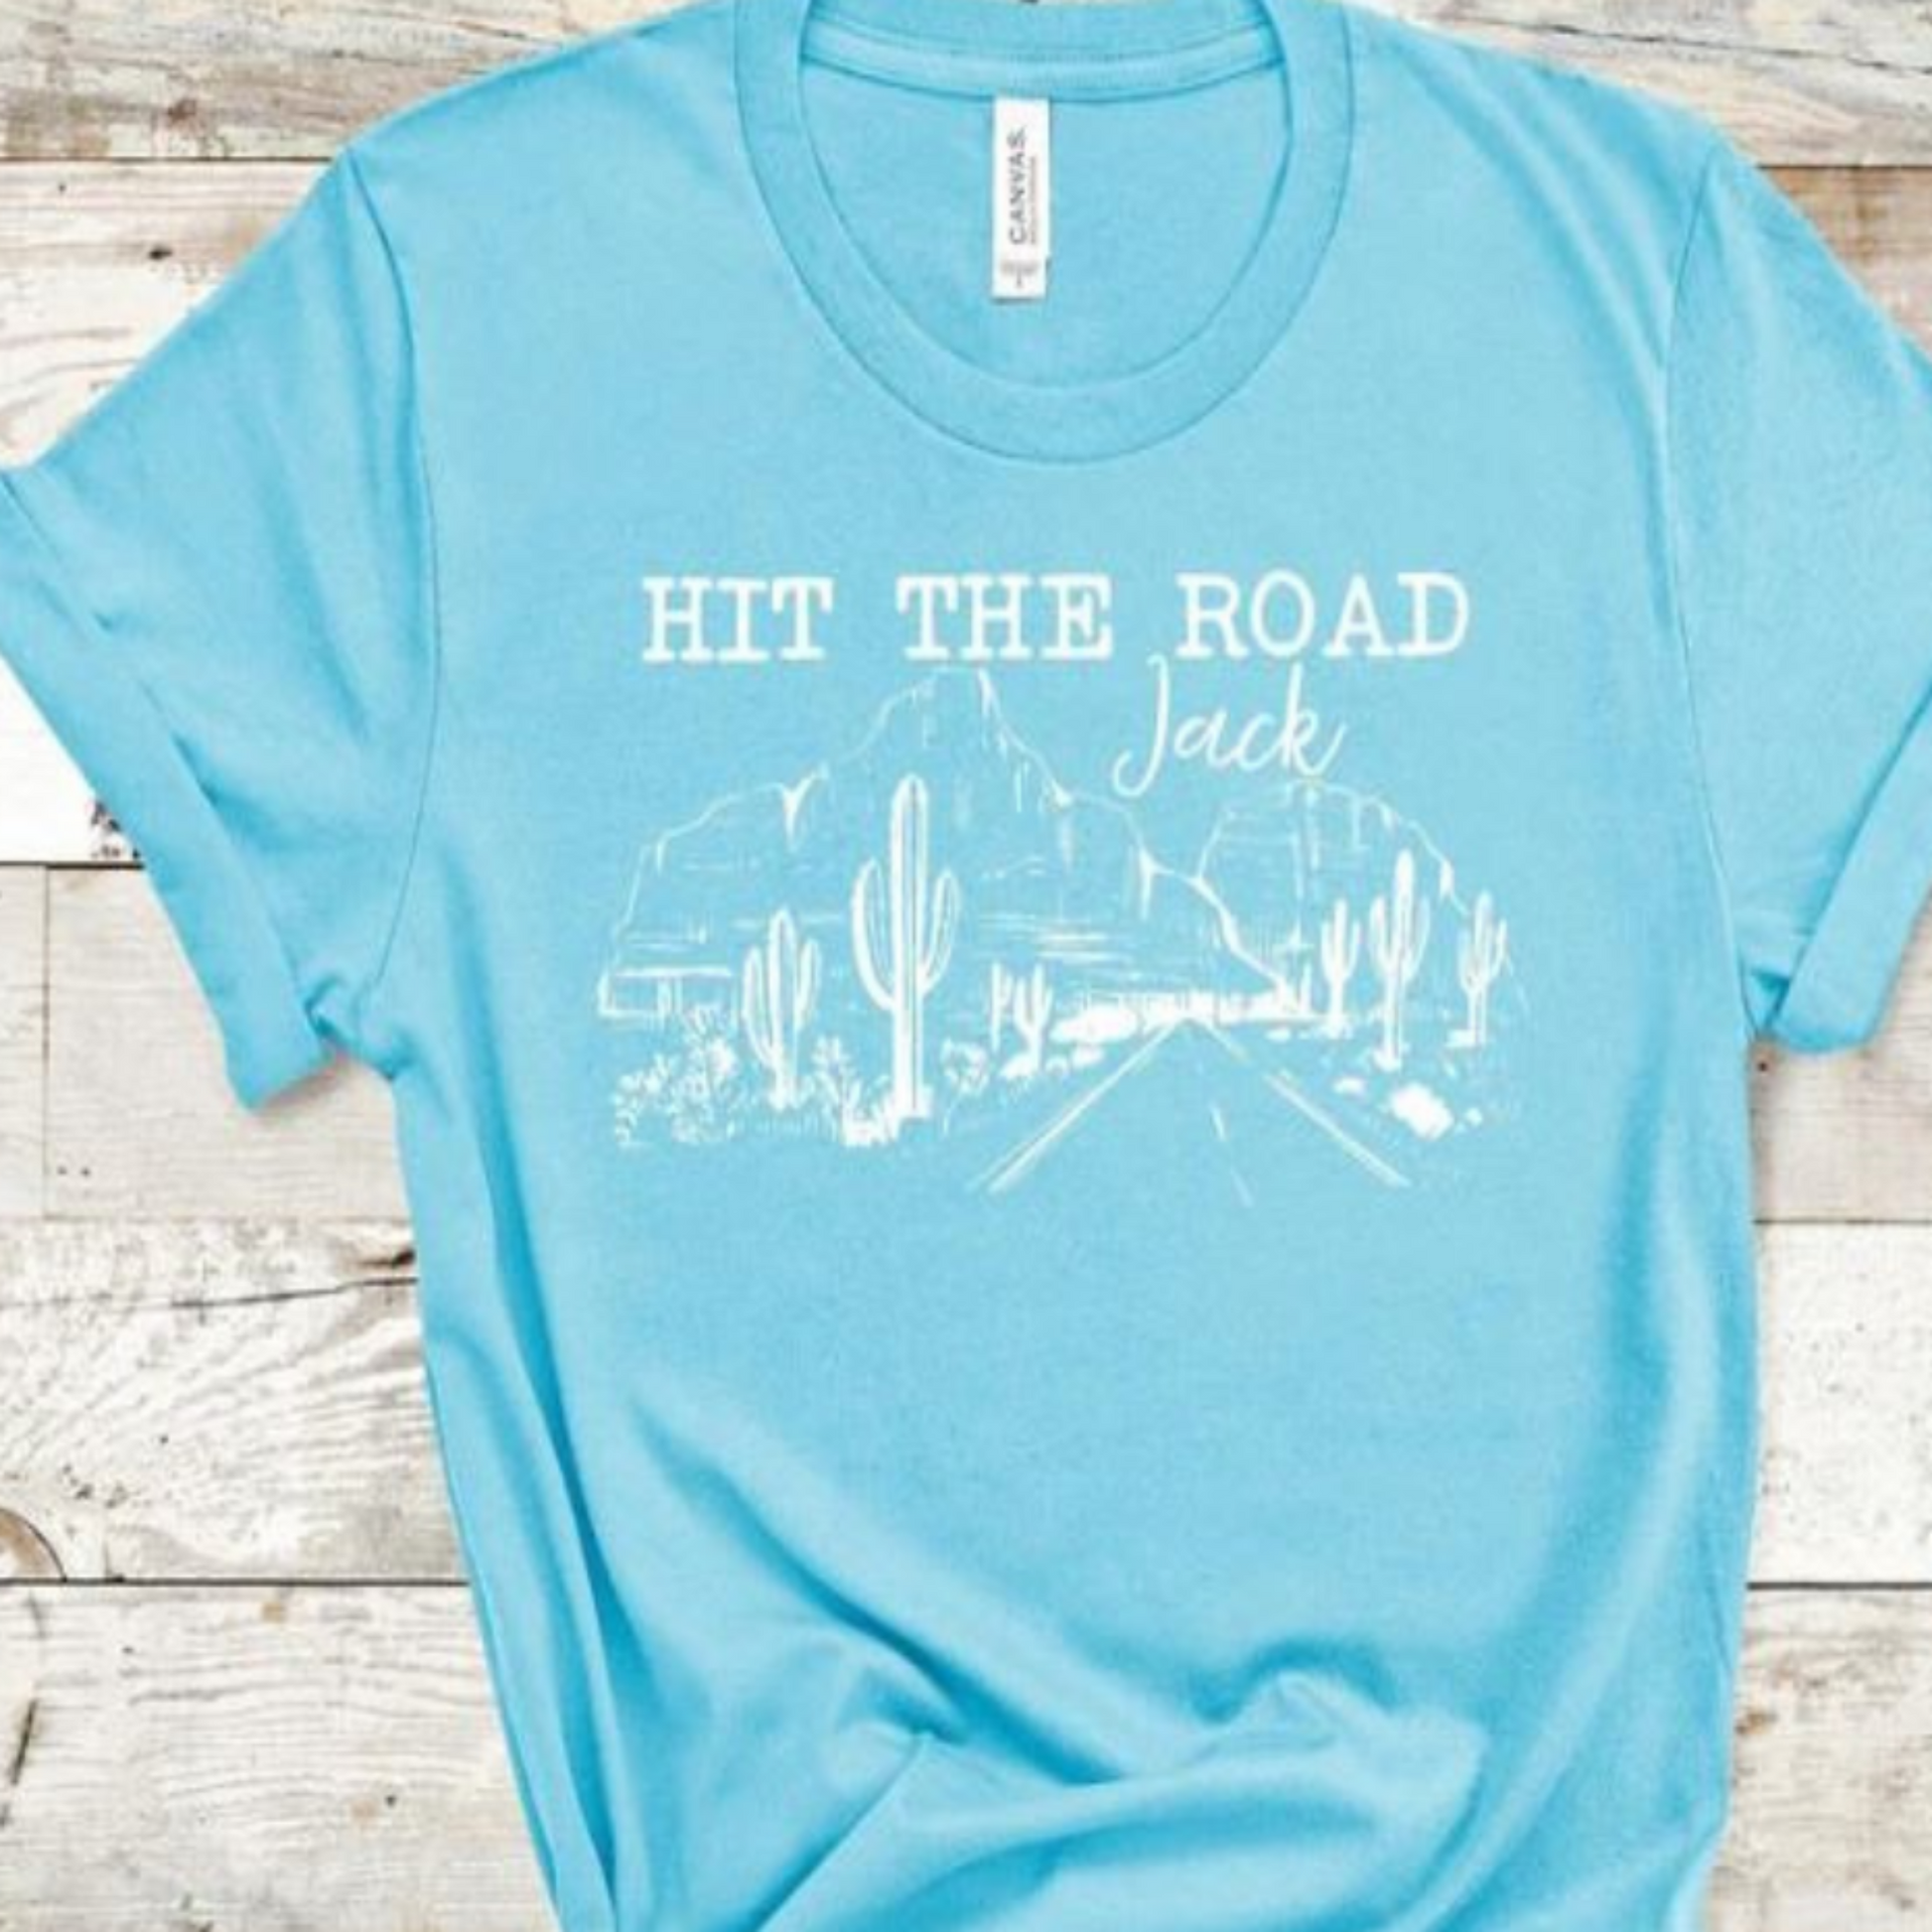 hit_the_road_jack specialty tee travel shirt casual wear everyday tshirt